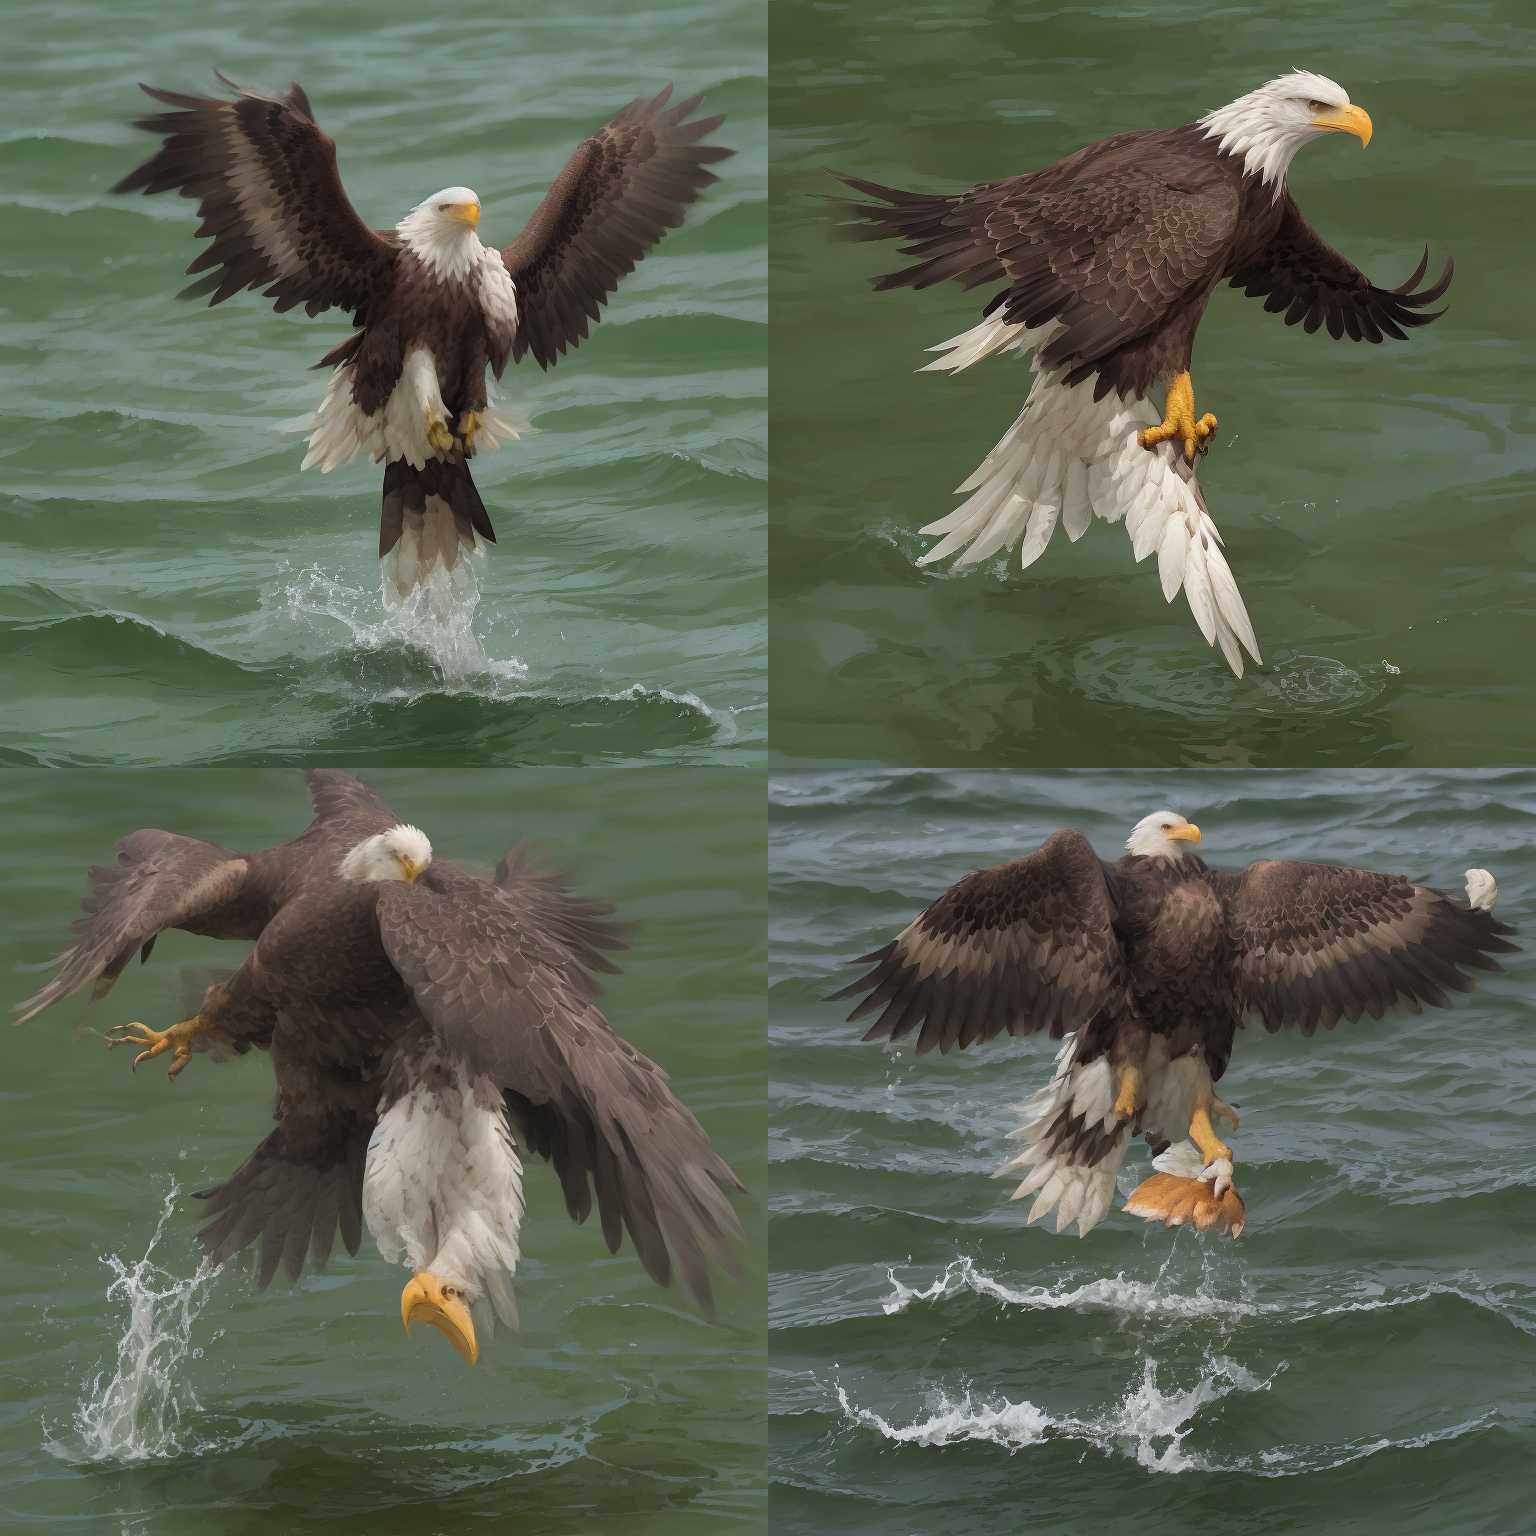 An eagle catching a fish